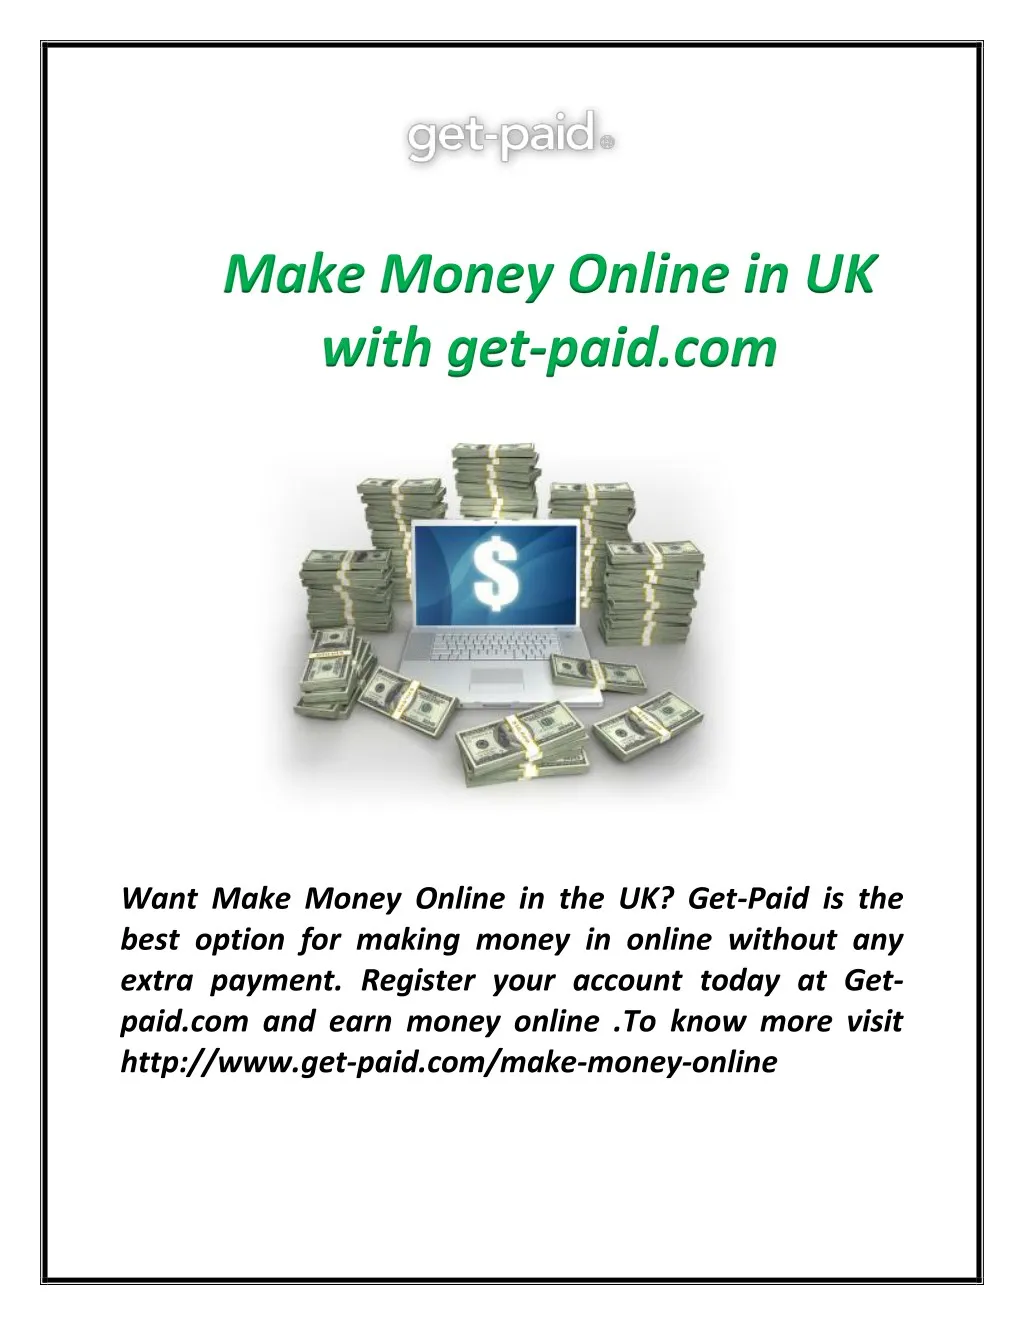 make money online in uk with get paid com